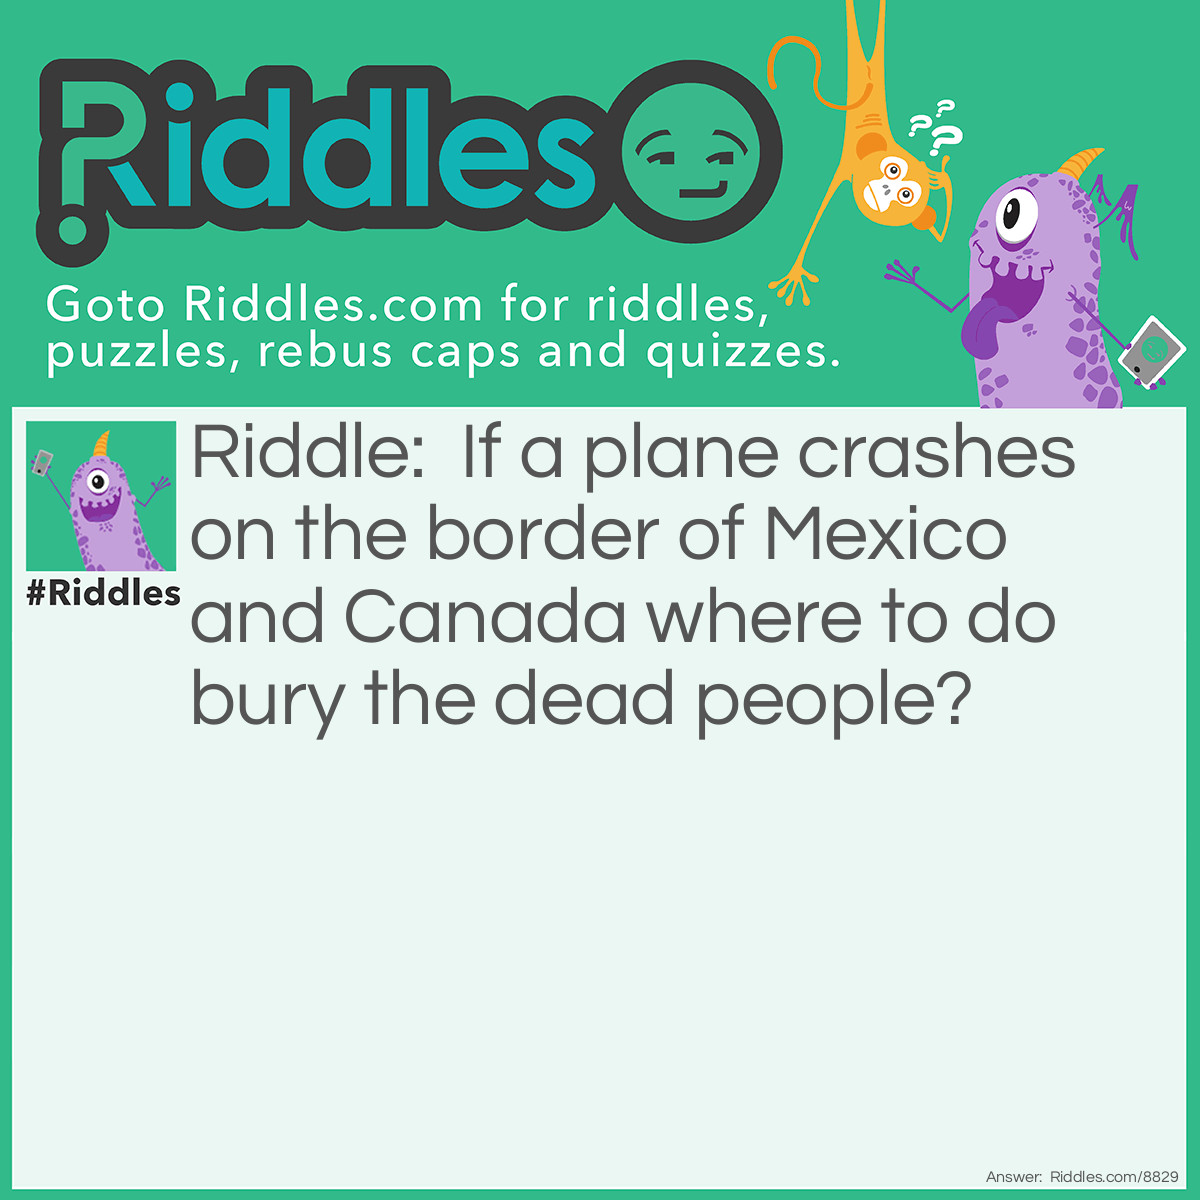 Riddle: If a plane crashes on the border of Mexico and Canada where to do bury the dead people? Answer: There's no border between Mexico and Canada!